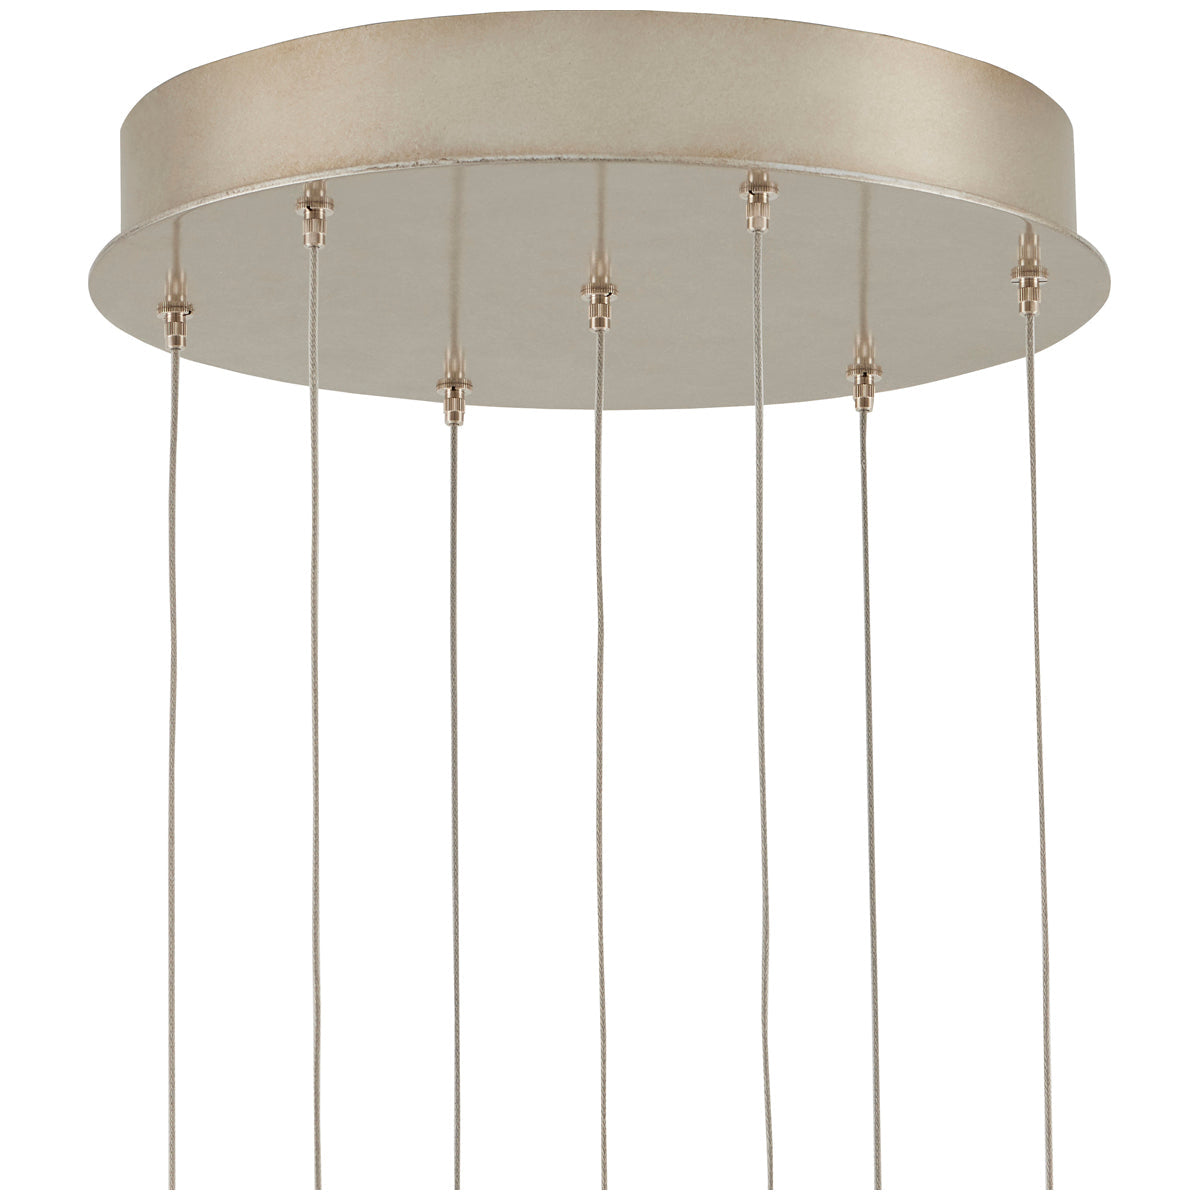 Currey and Company Beehive Round 7-Light Multi-Drop Pendant